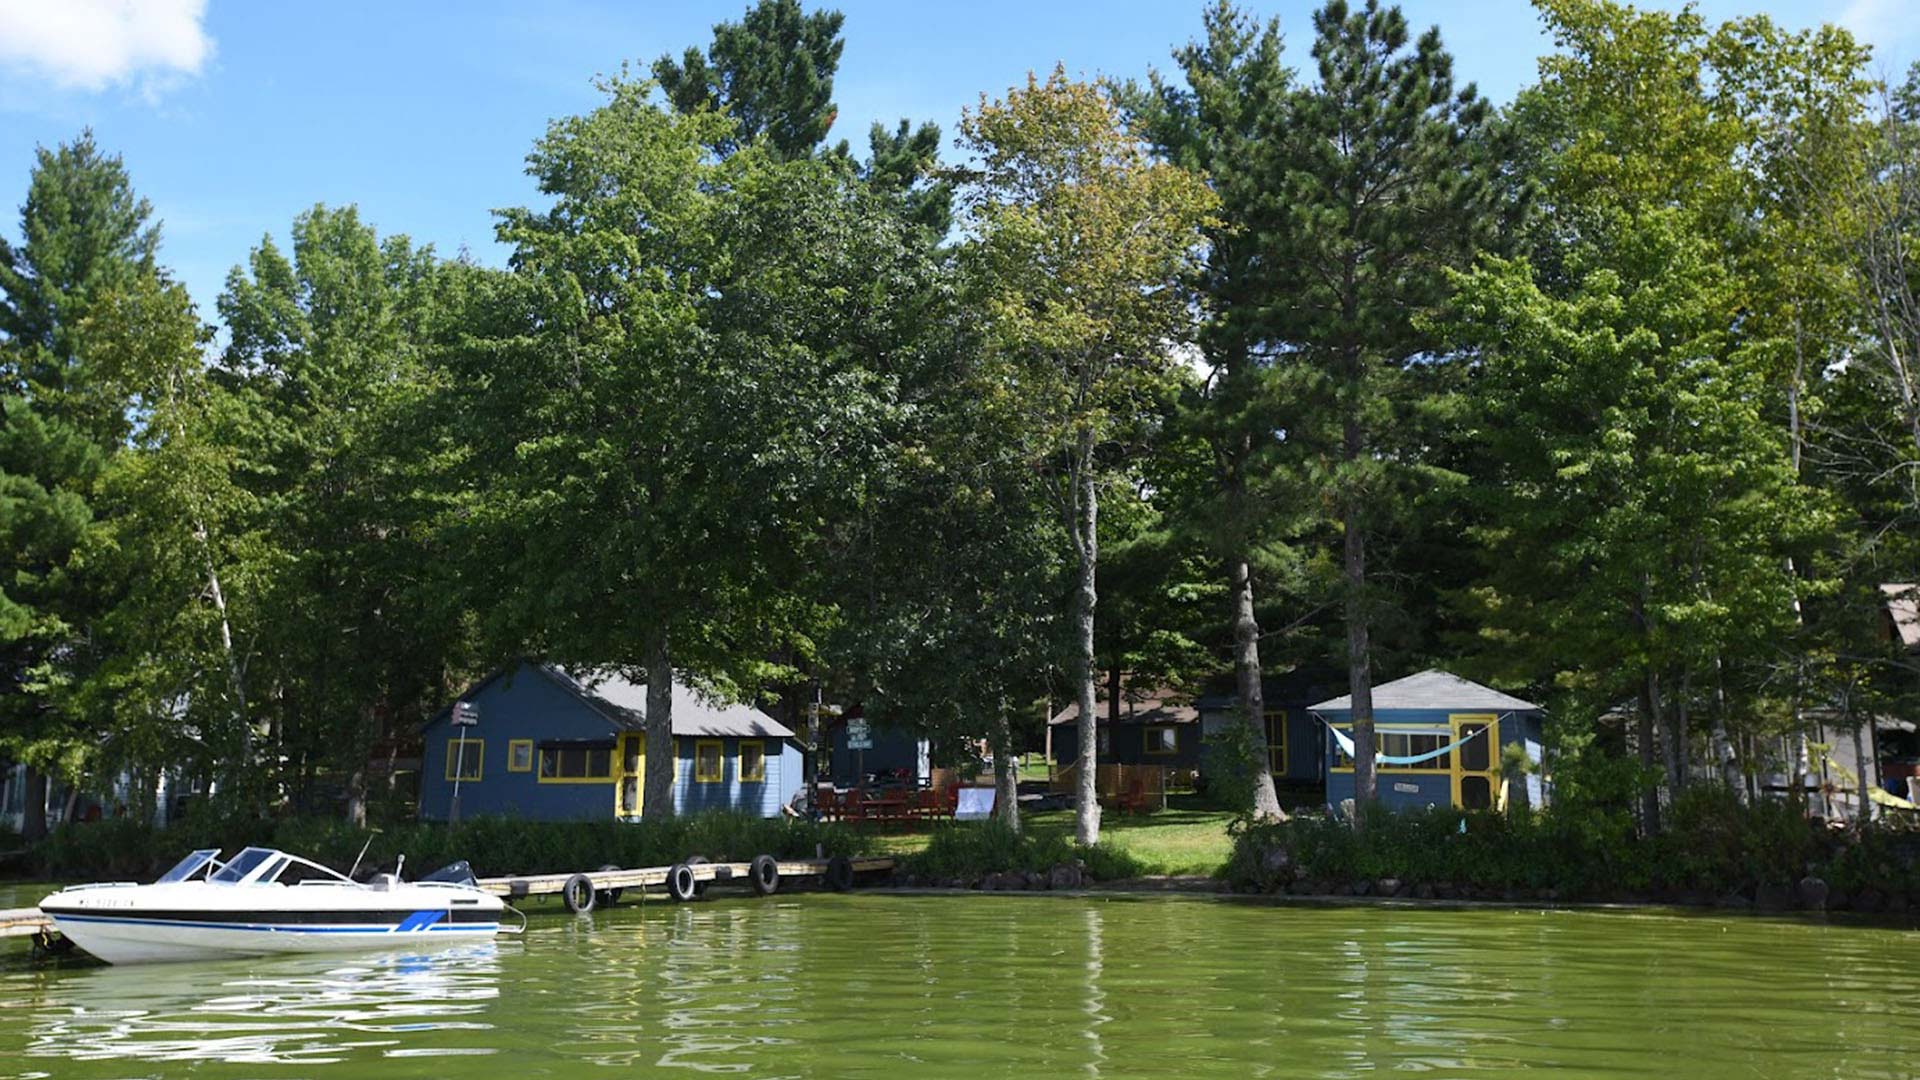 Where to stay in Oneida County | View of Willemsen's Golden Sands Resort from the water